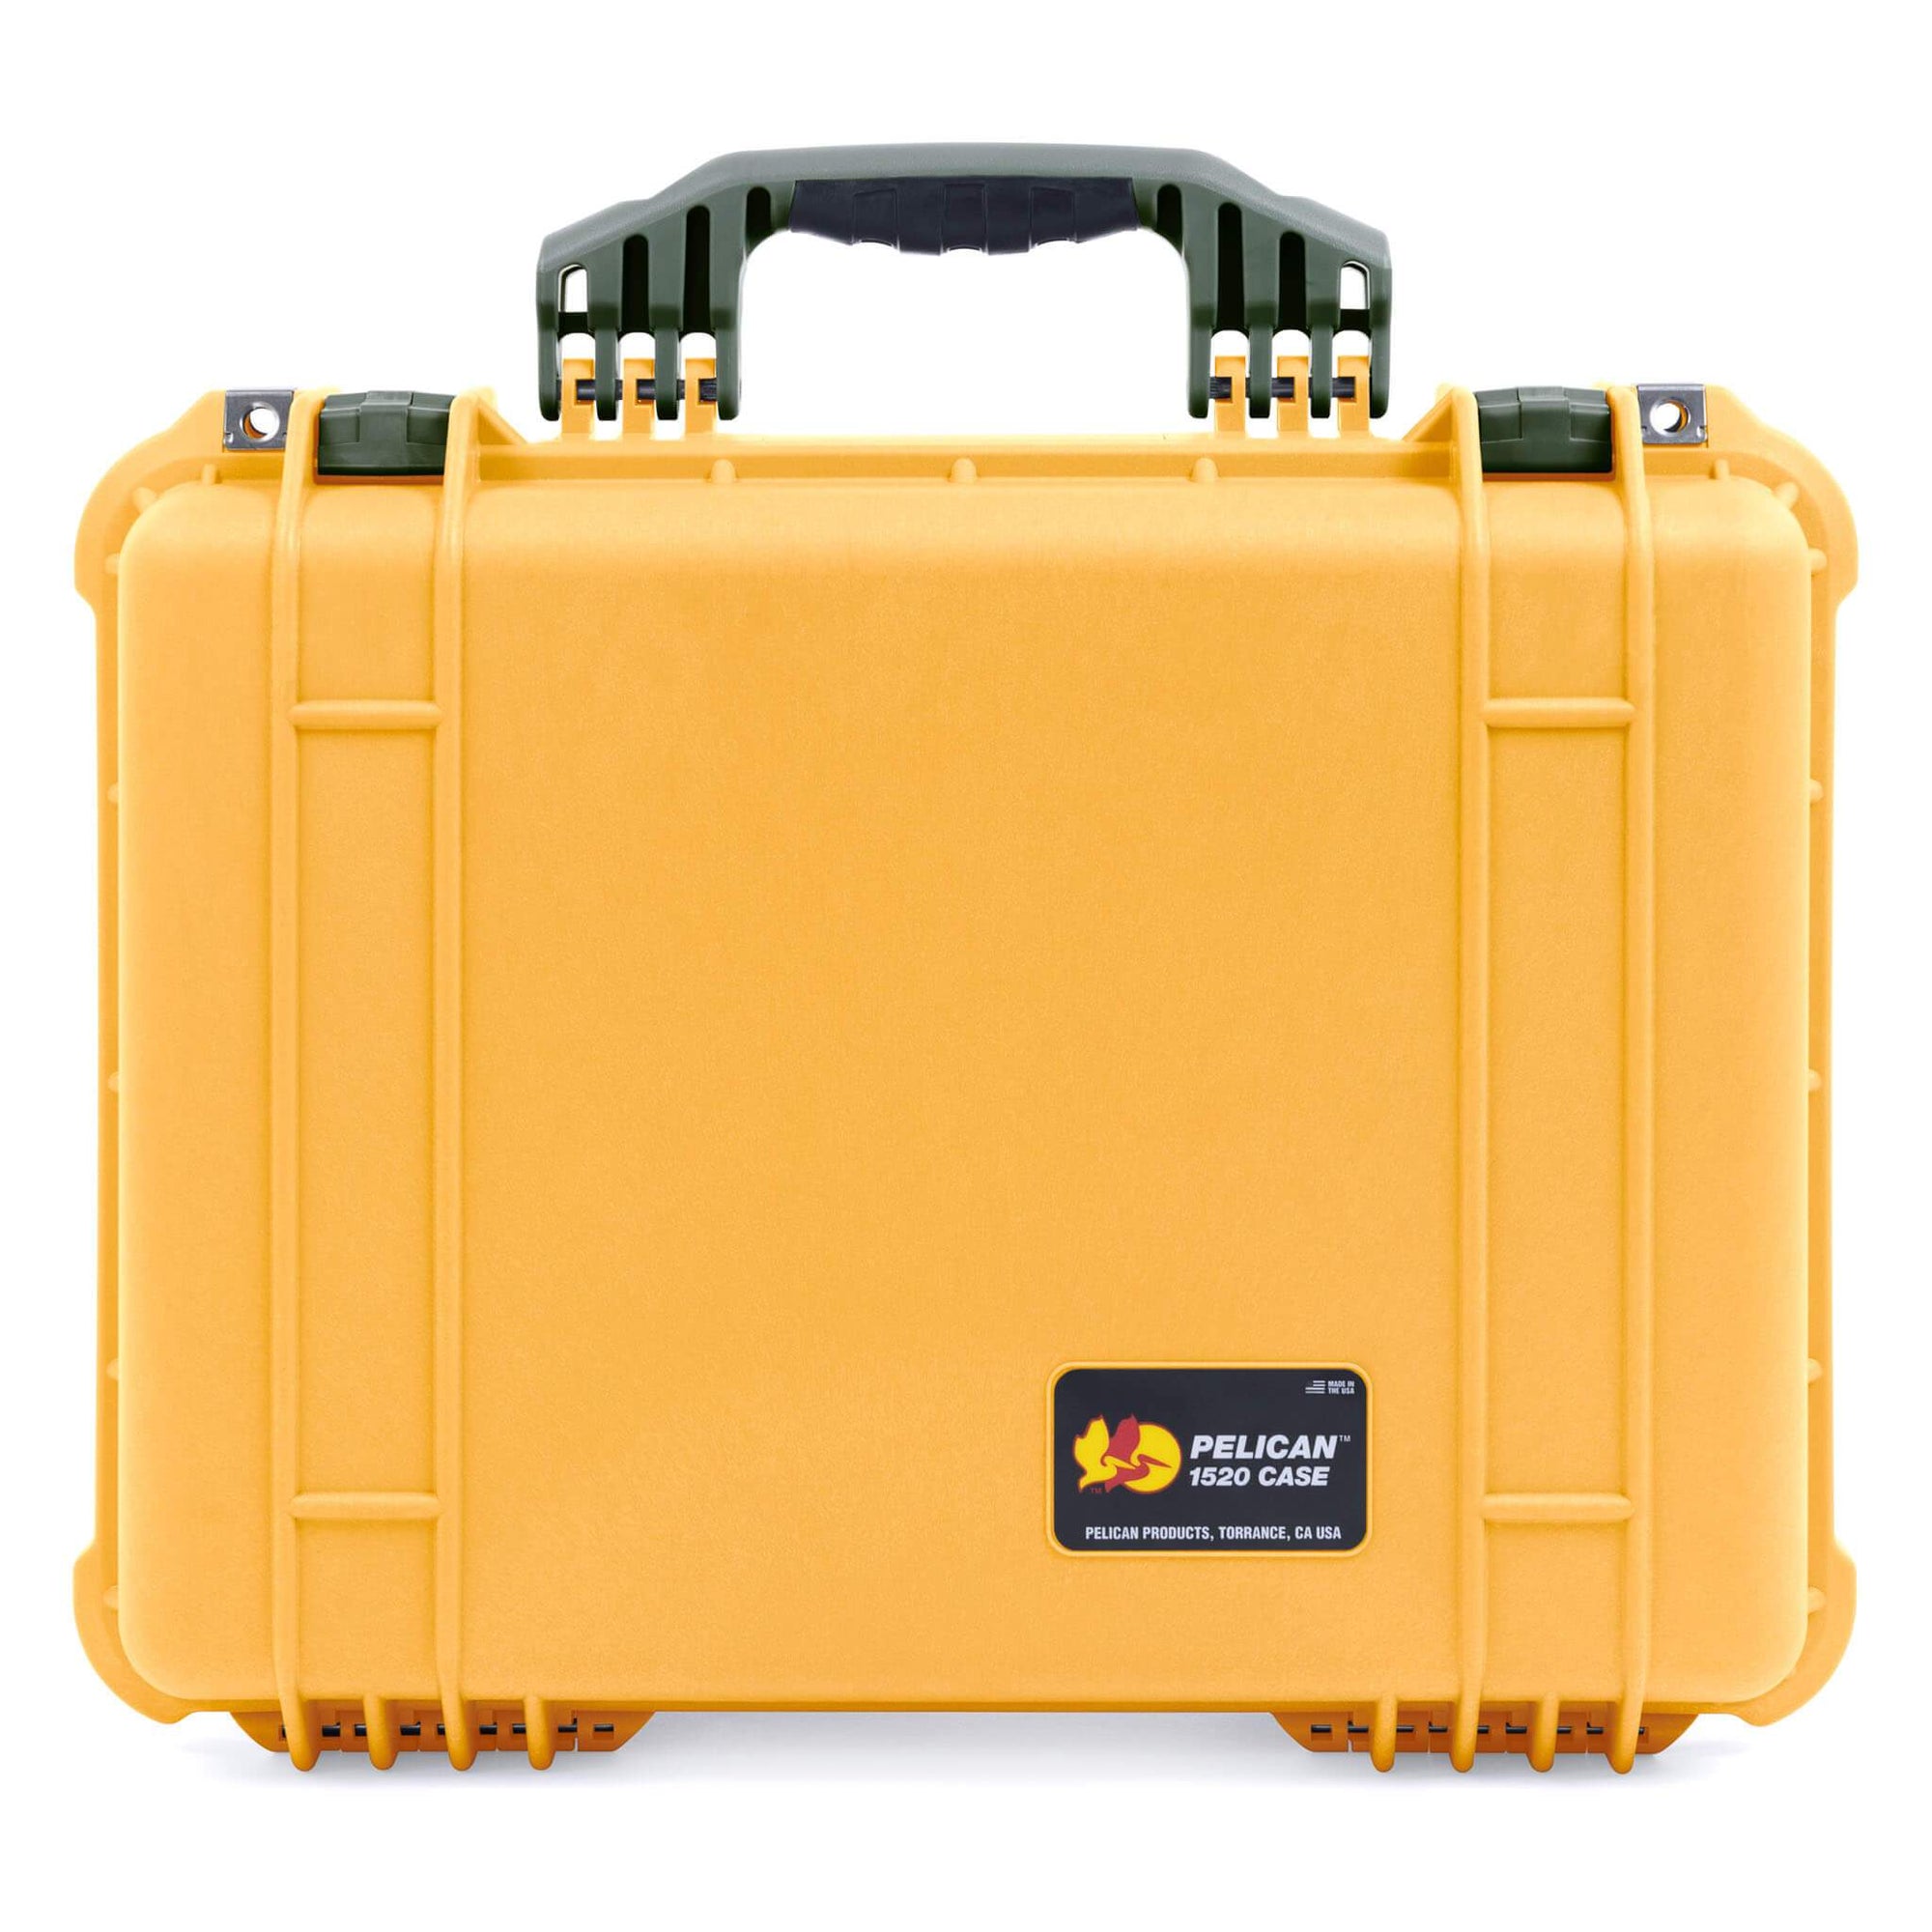 Pelican 1520 Case, Yellow with OD Green Handle & Latches ColorCase 